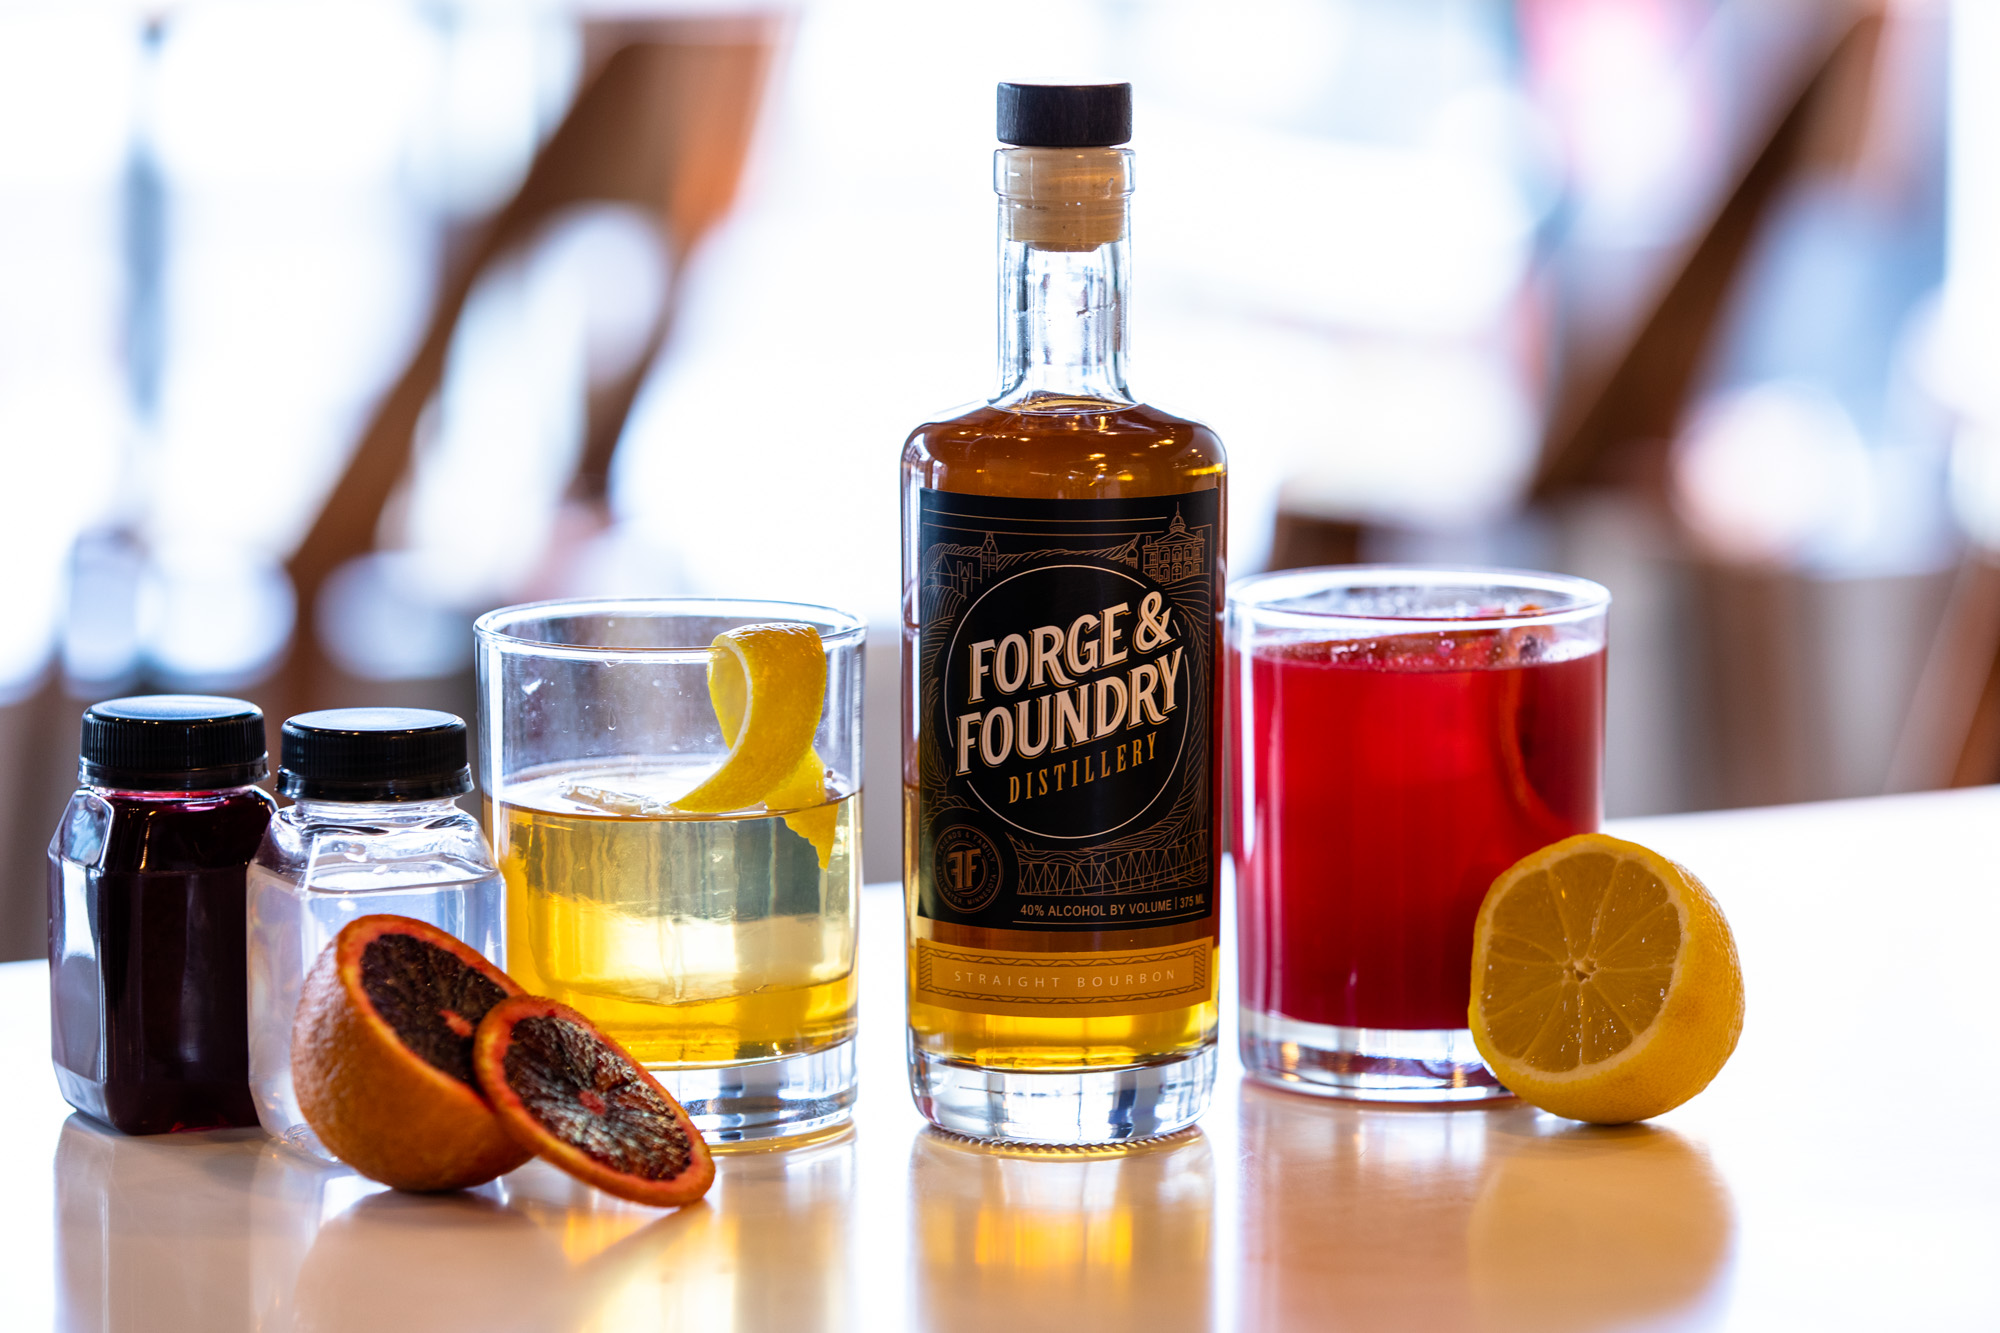 Cocktails at Forge & Foundry Distillery, located in Stillwater, Minnesota • Photos by Jordan Wipf